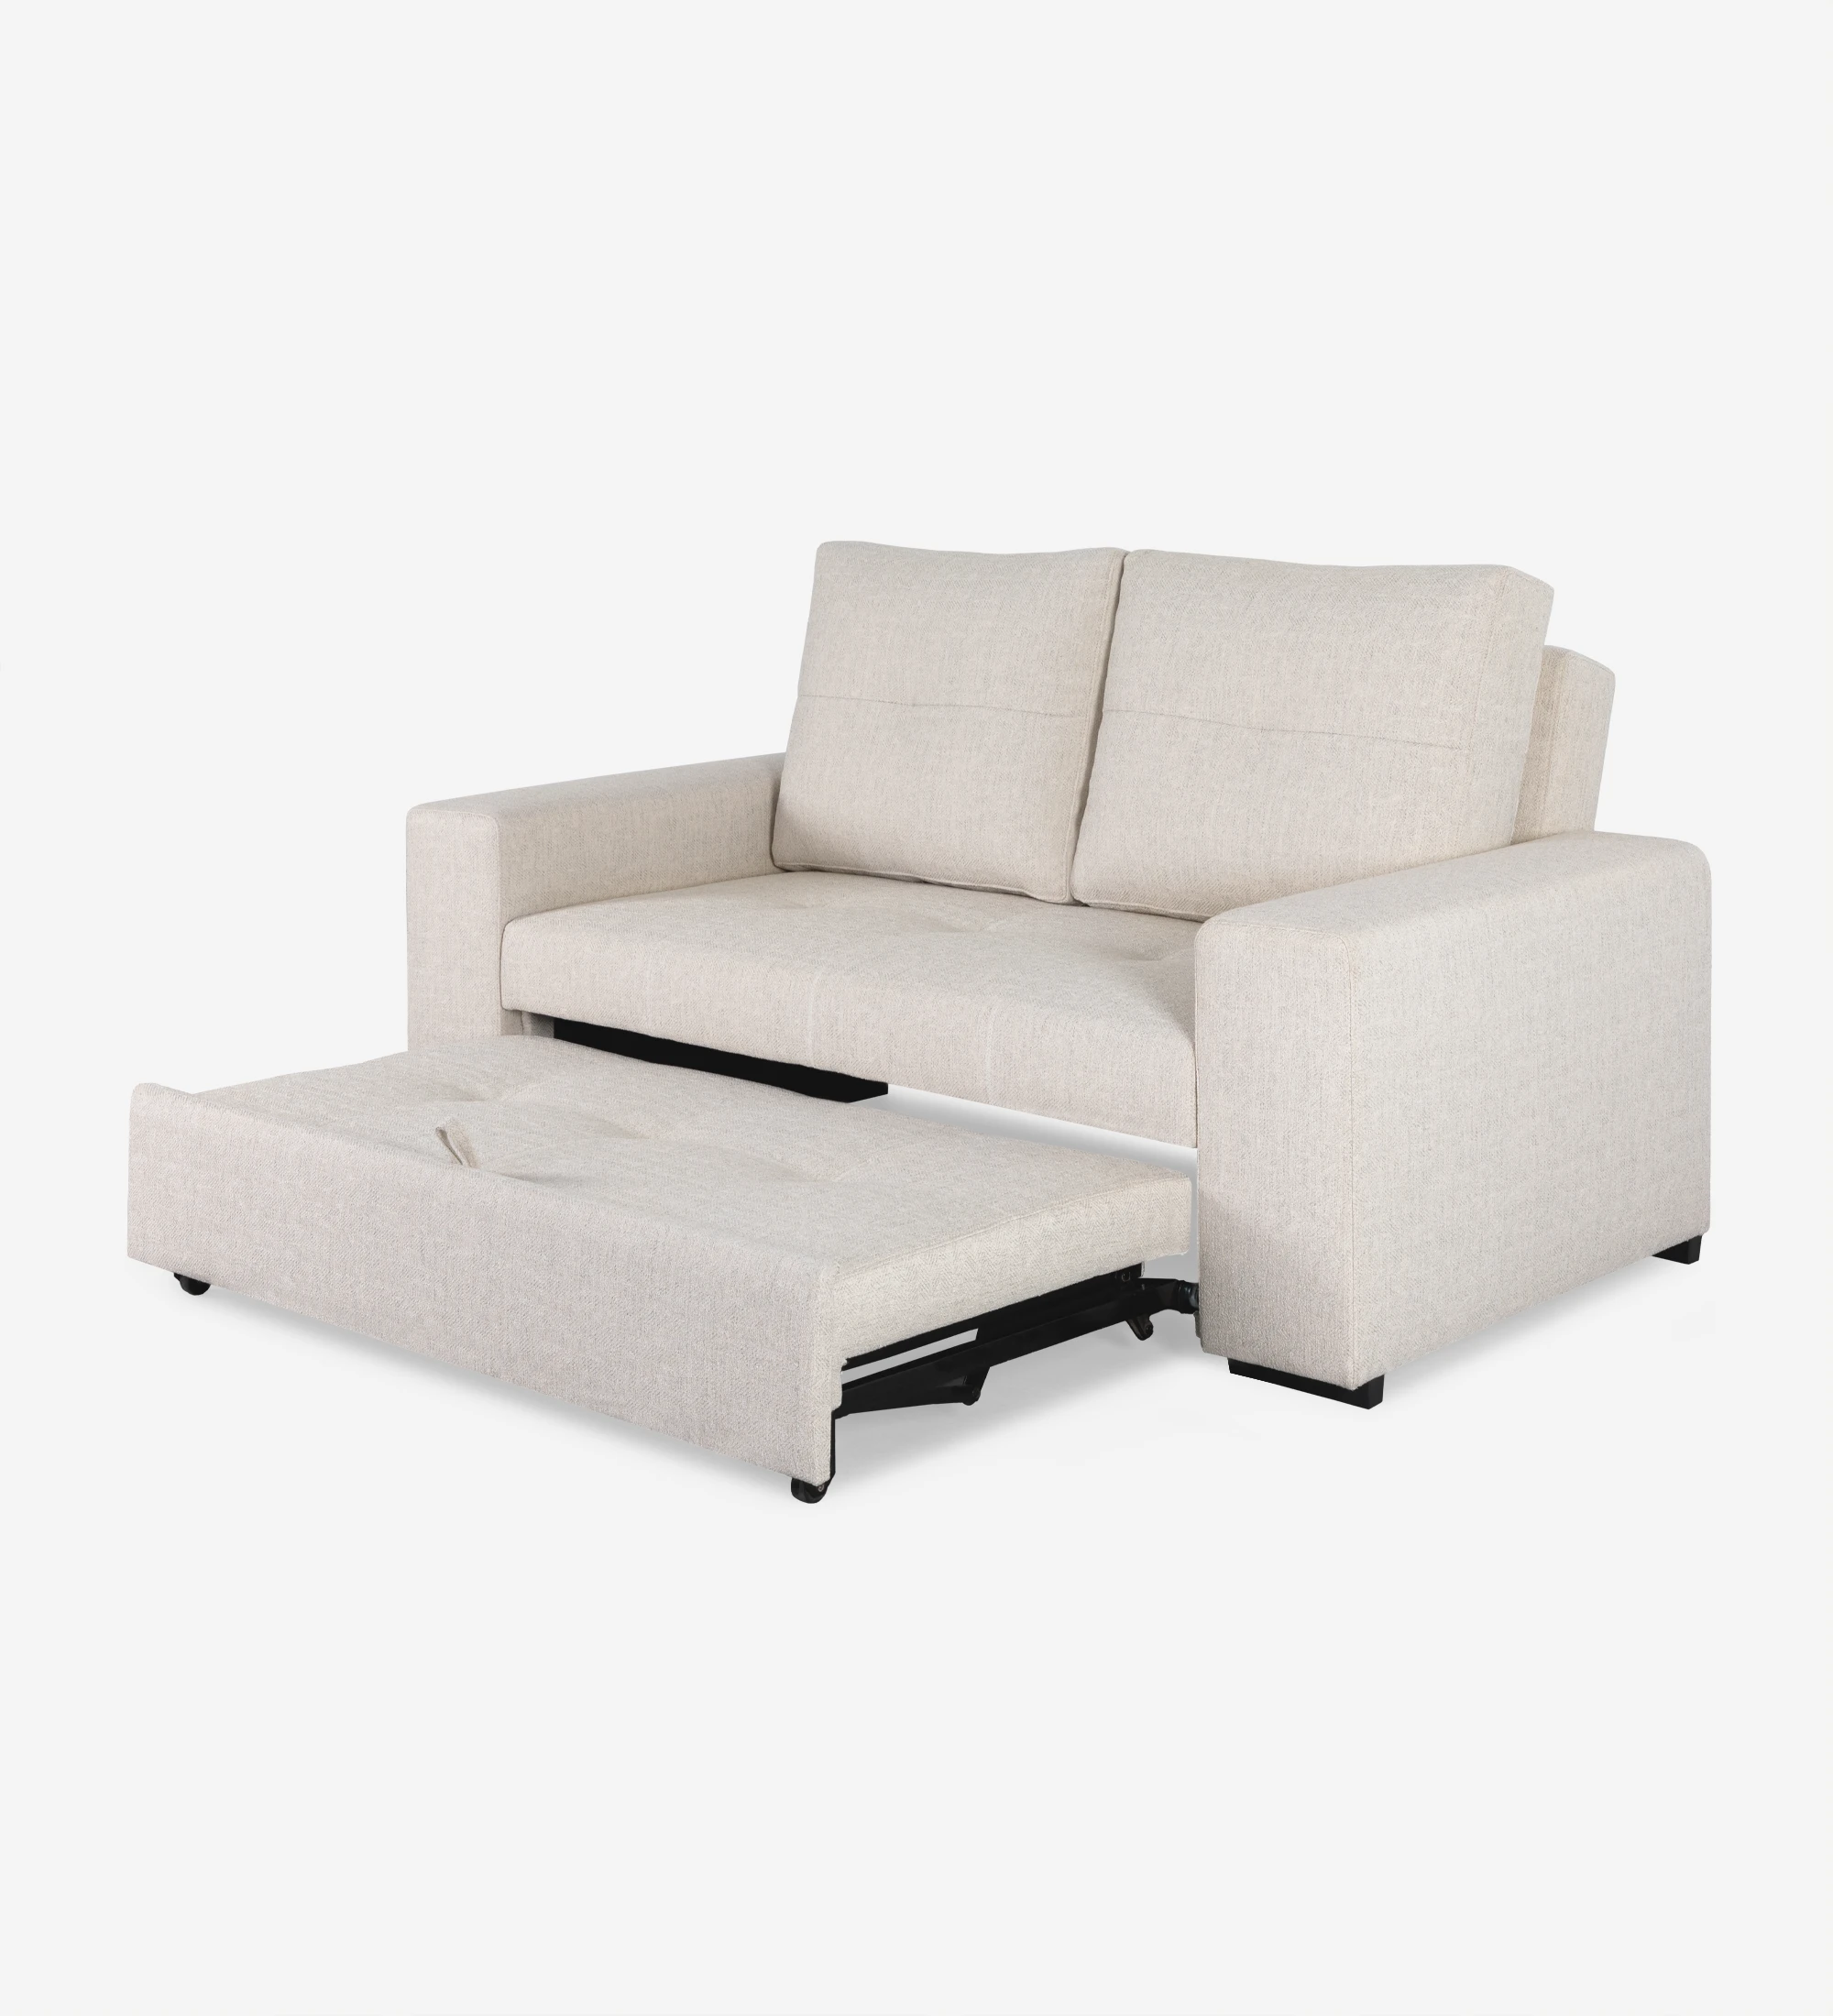 Haiti 2-seater sofa bed upholstered in beige fabric, removable back cushions, 180 cm.